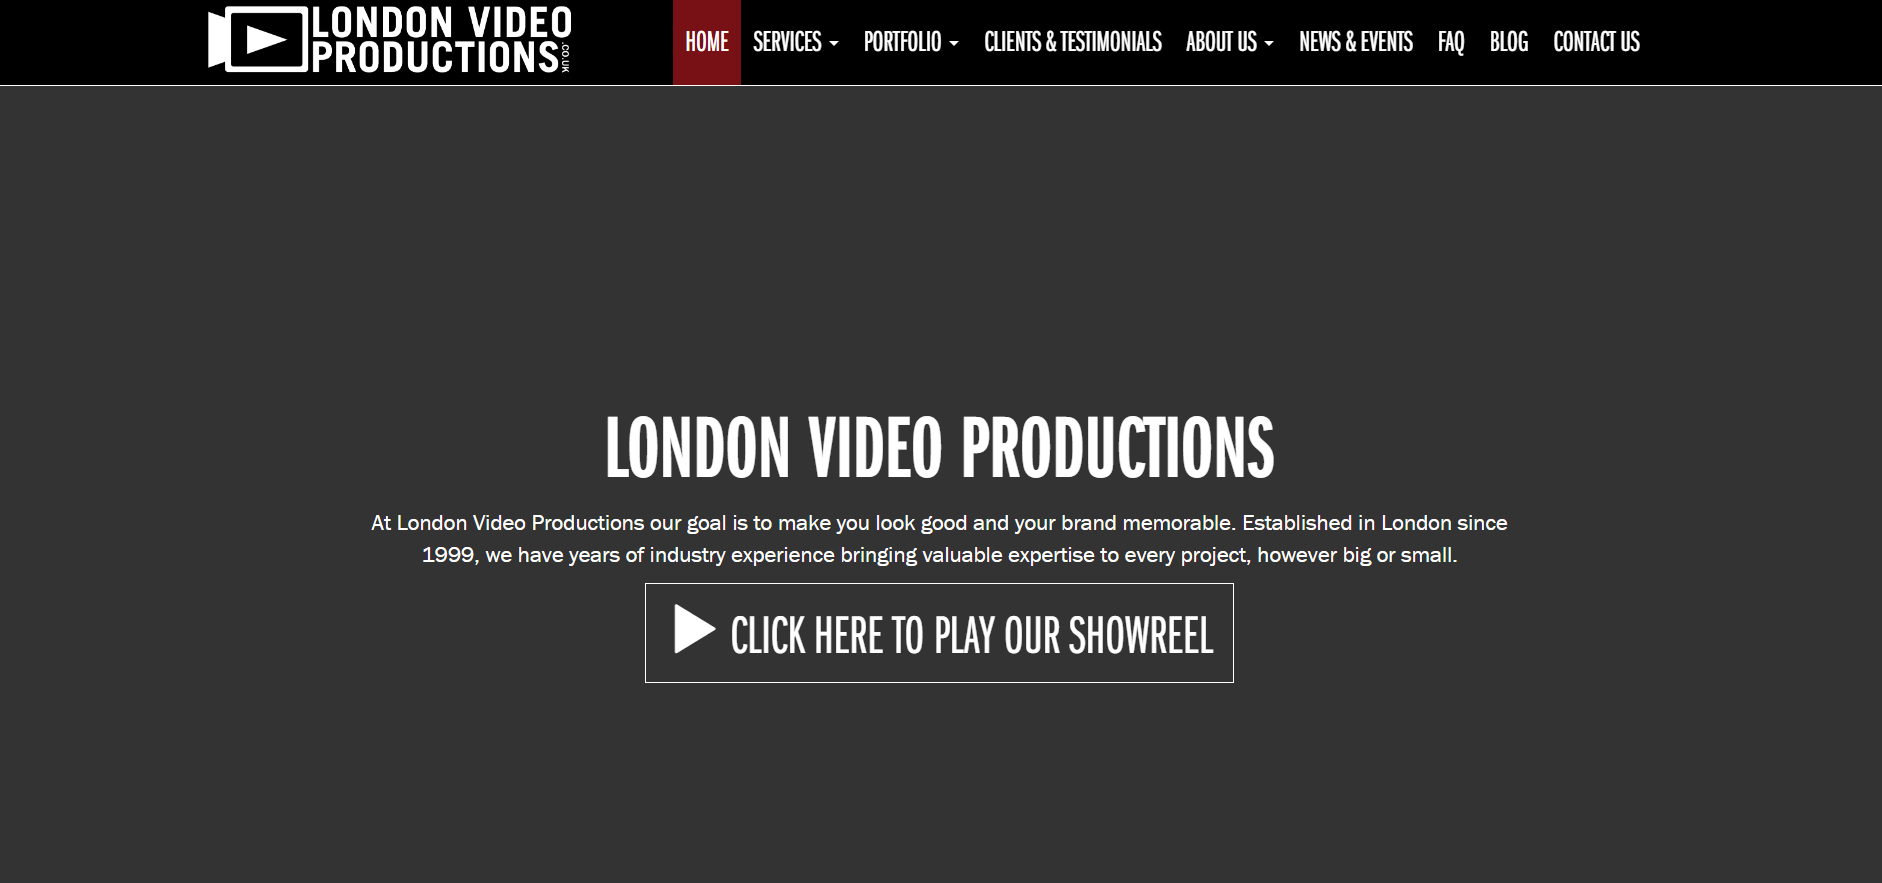 LONDON VIDEO PRODUCTIONS